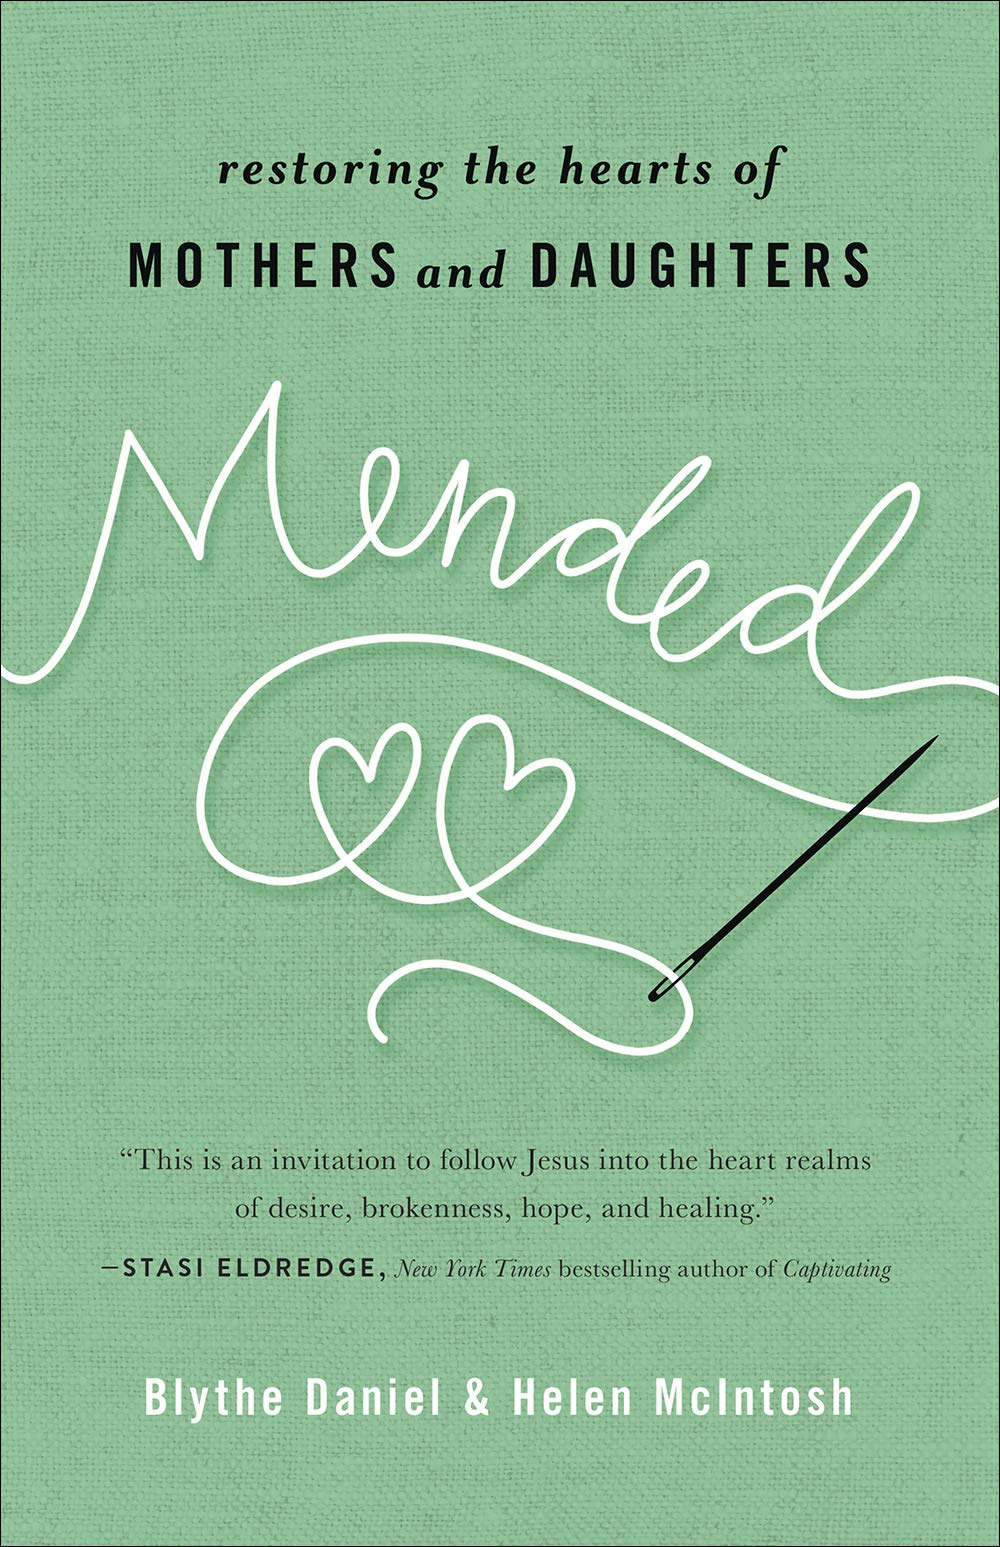 Mended- Restoring the Hearts of Mothers and Daughters